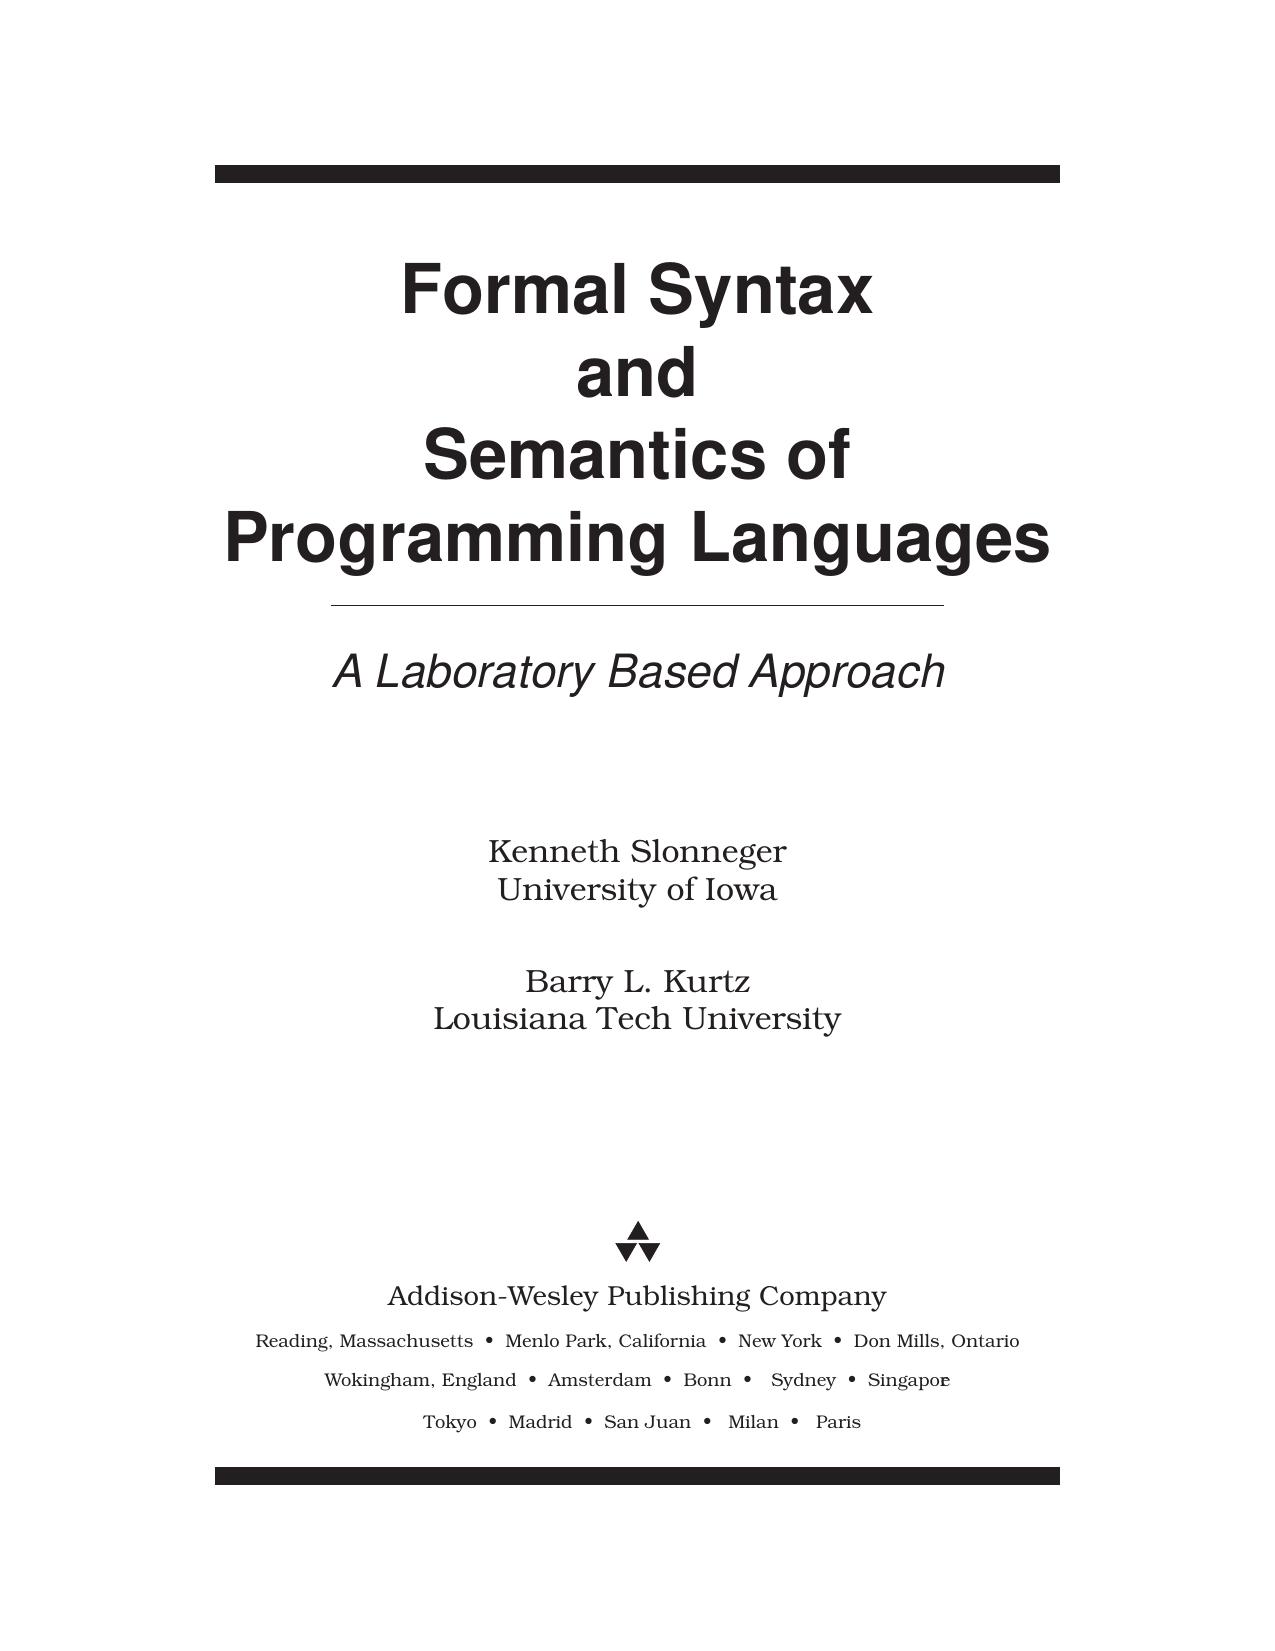 Addison Wesley - Formal Syntax and Semantics of Programming Languages